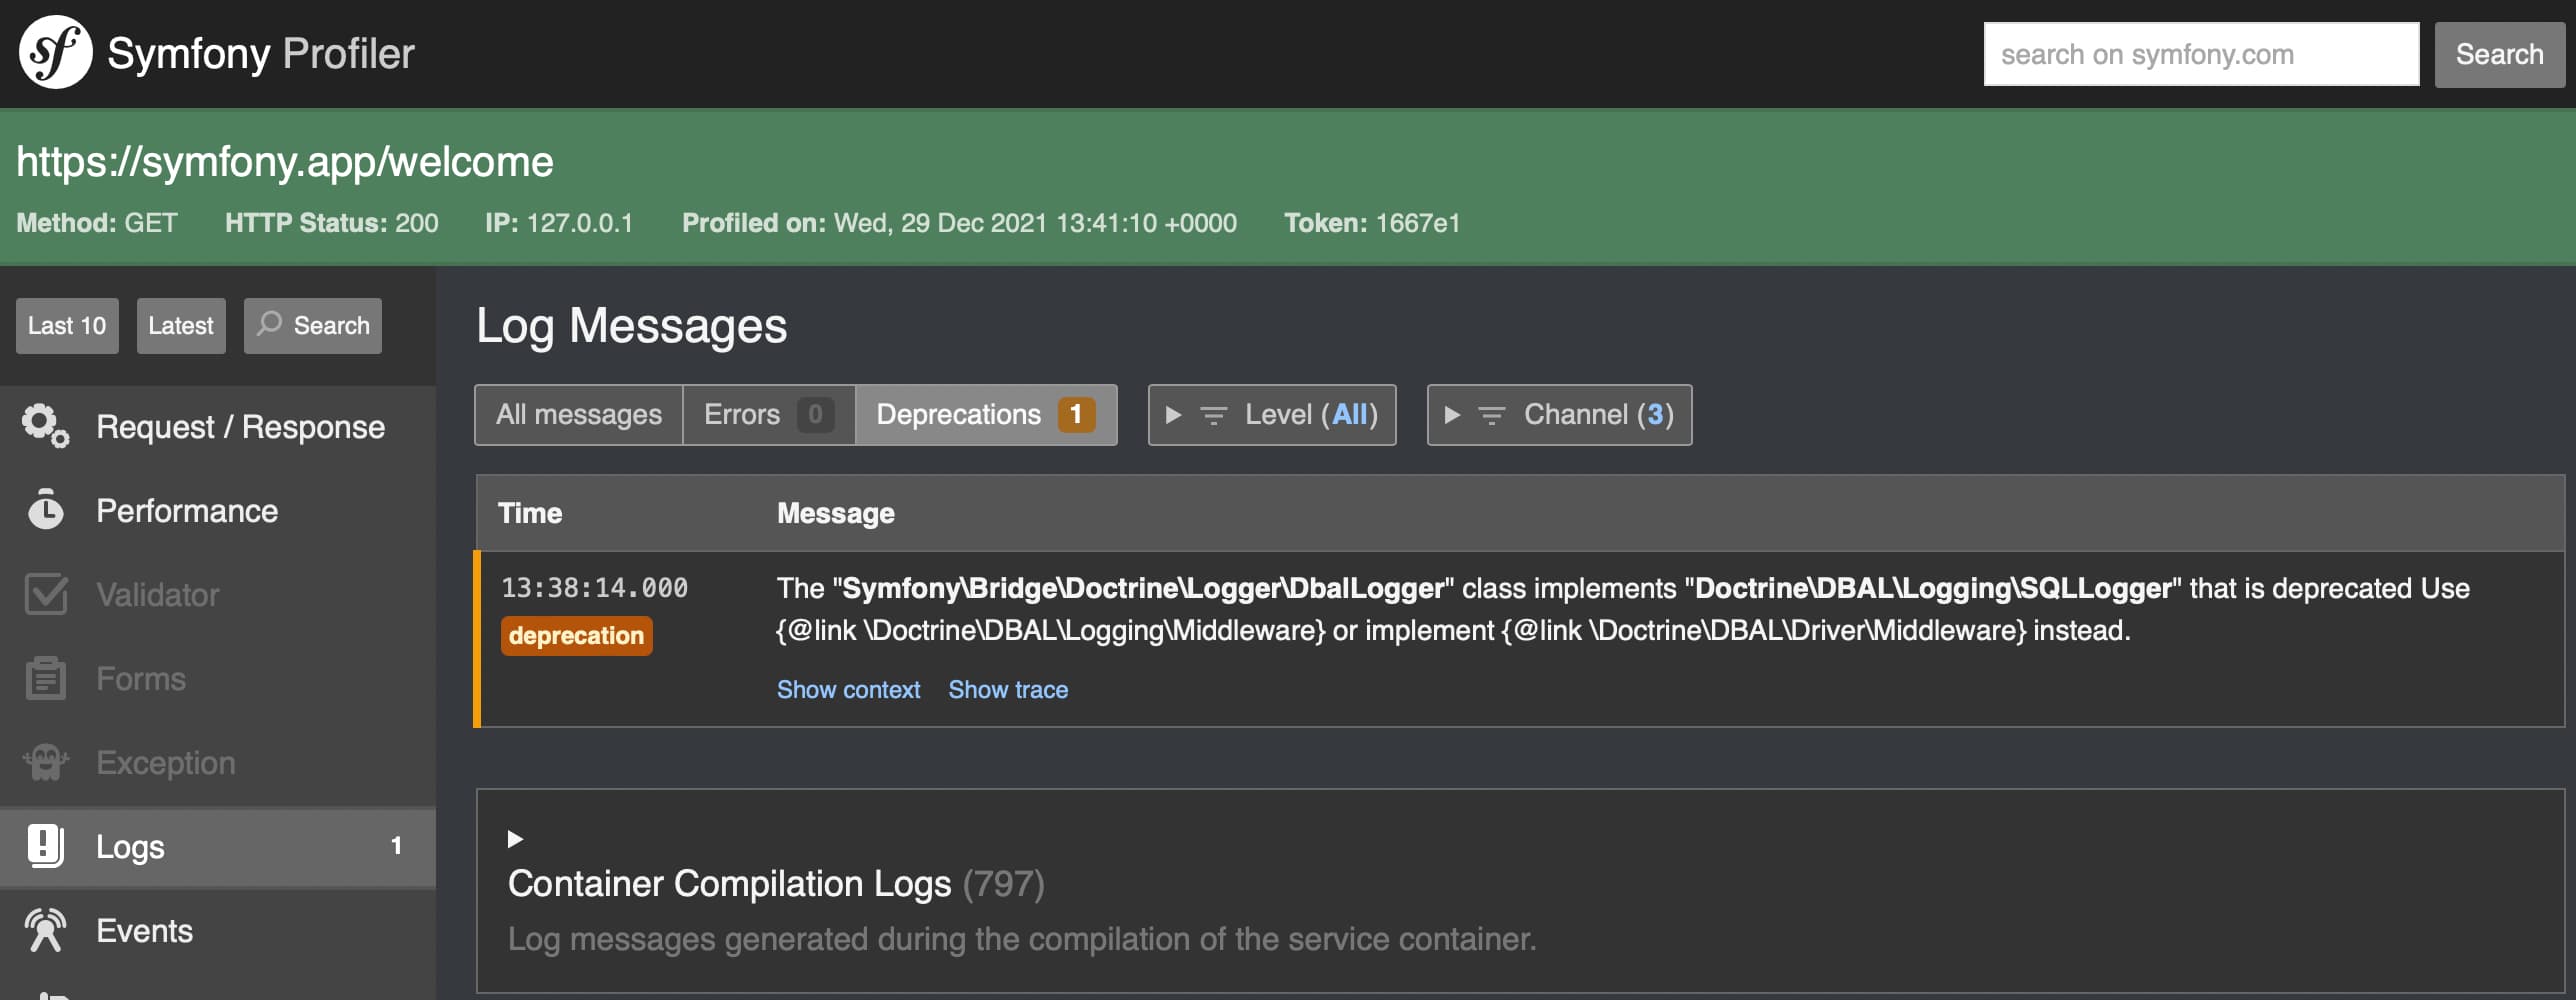 The Logs page of the Symfony Profiler showing the deprecation notices.